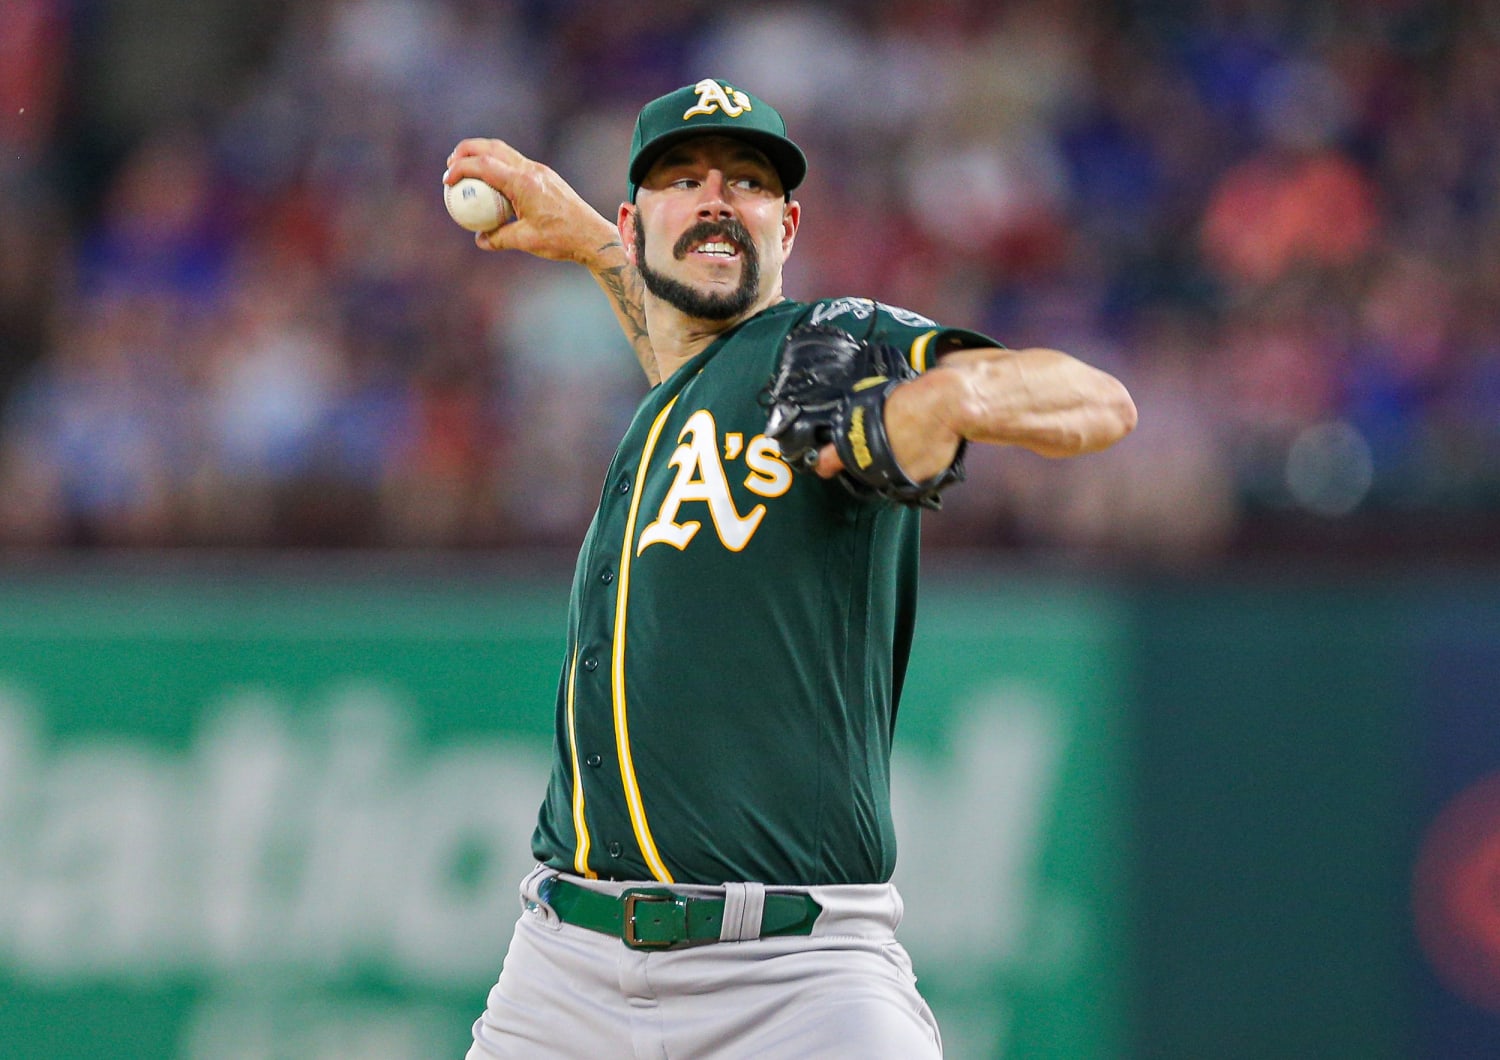 A History of Facial Hair for the Oakland Athletics